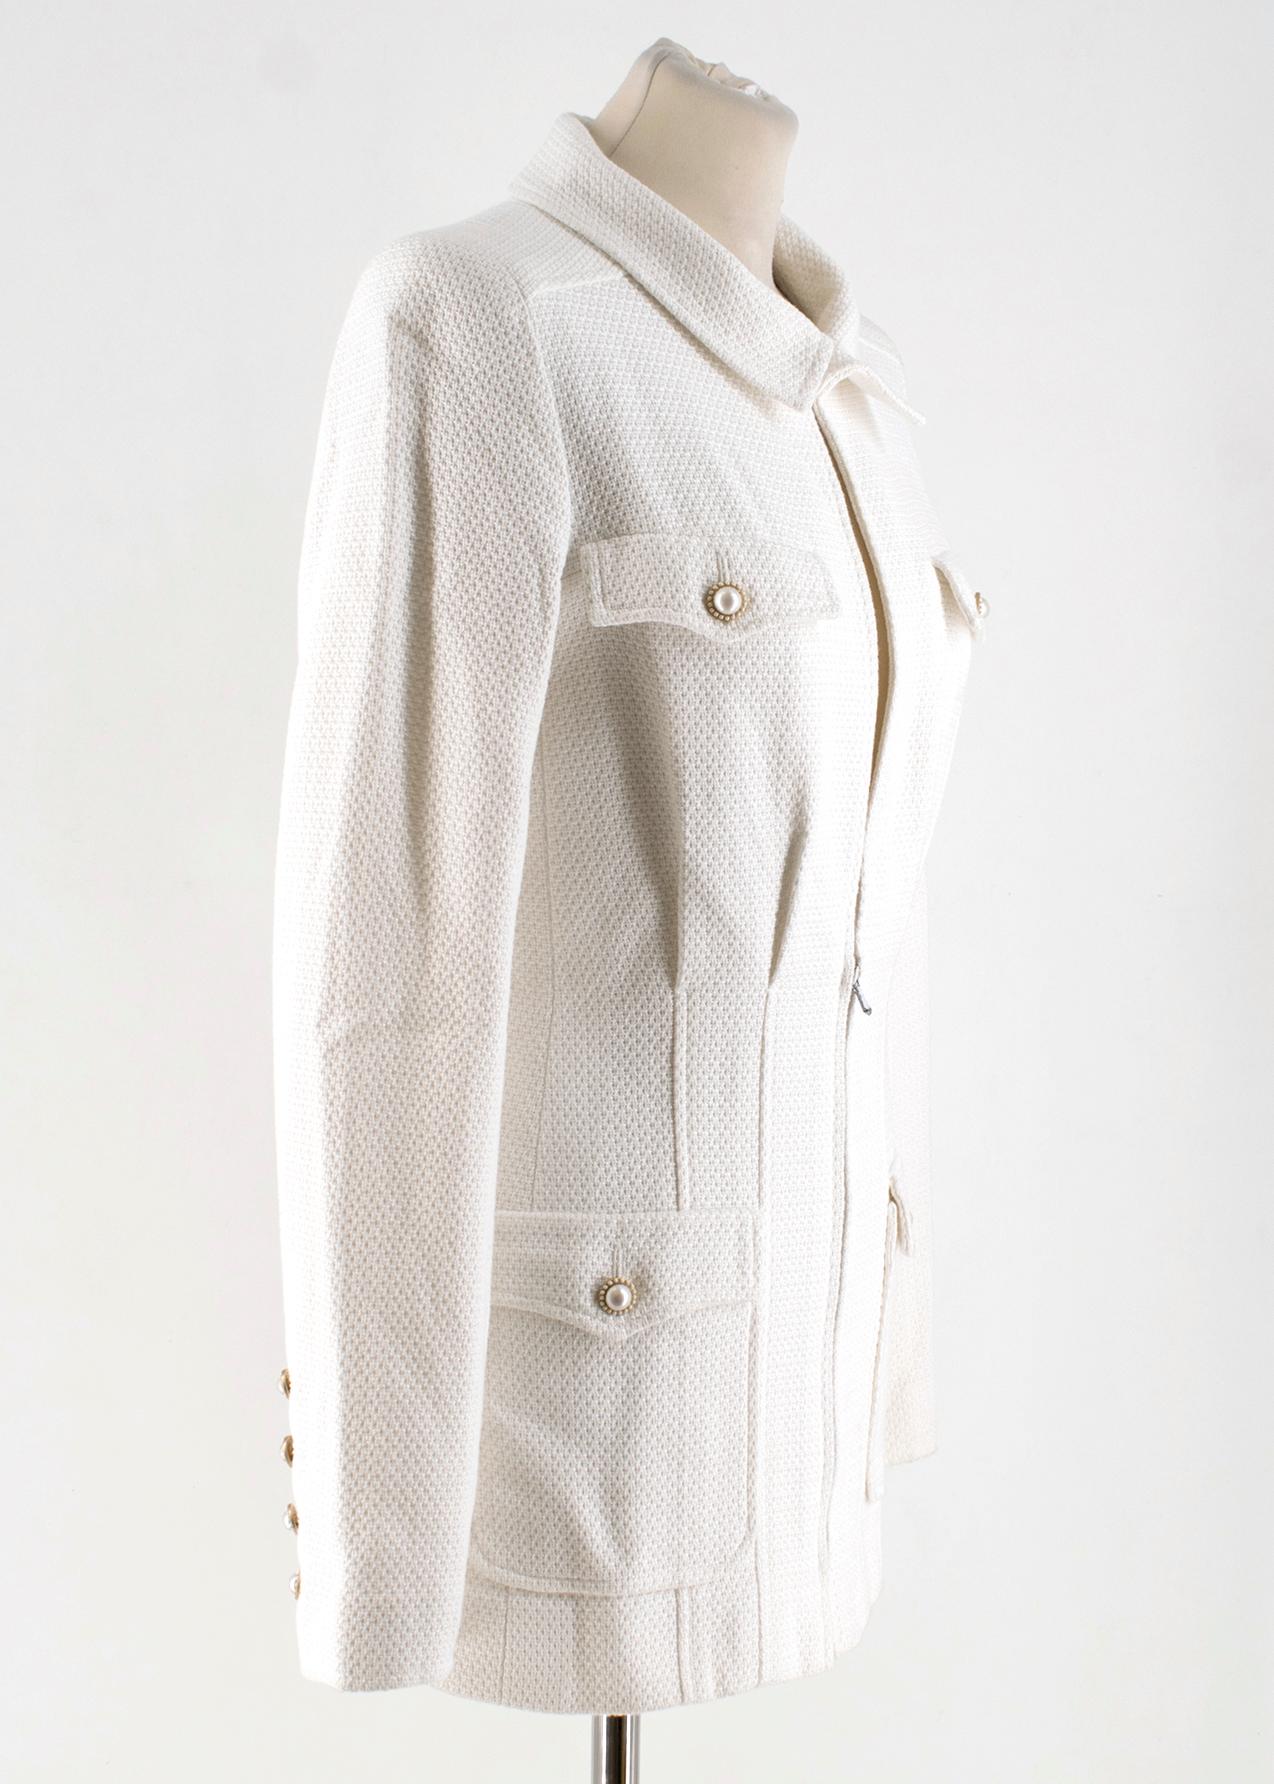 Chanel White Tweed Jacket

- White, mid-weight tweed jacket
- Padded shoulders, long sleeves 
- Breast pockets
- Front flapped pockets
- Faux-pearl embellished buttons
- Round neck, hook-and-eye fastening
- Gold-tone metal hardware, logo embroidery